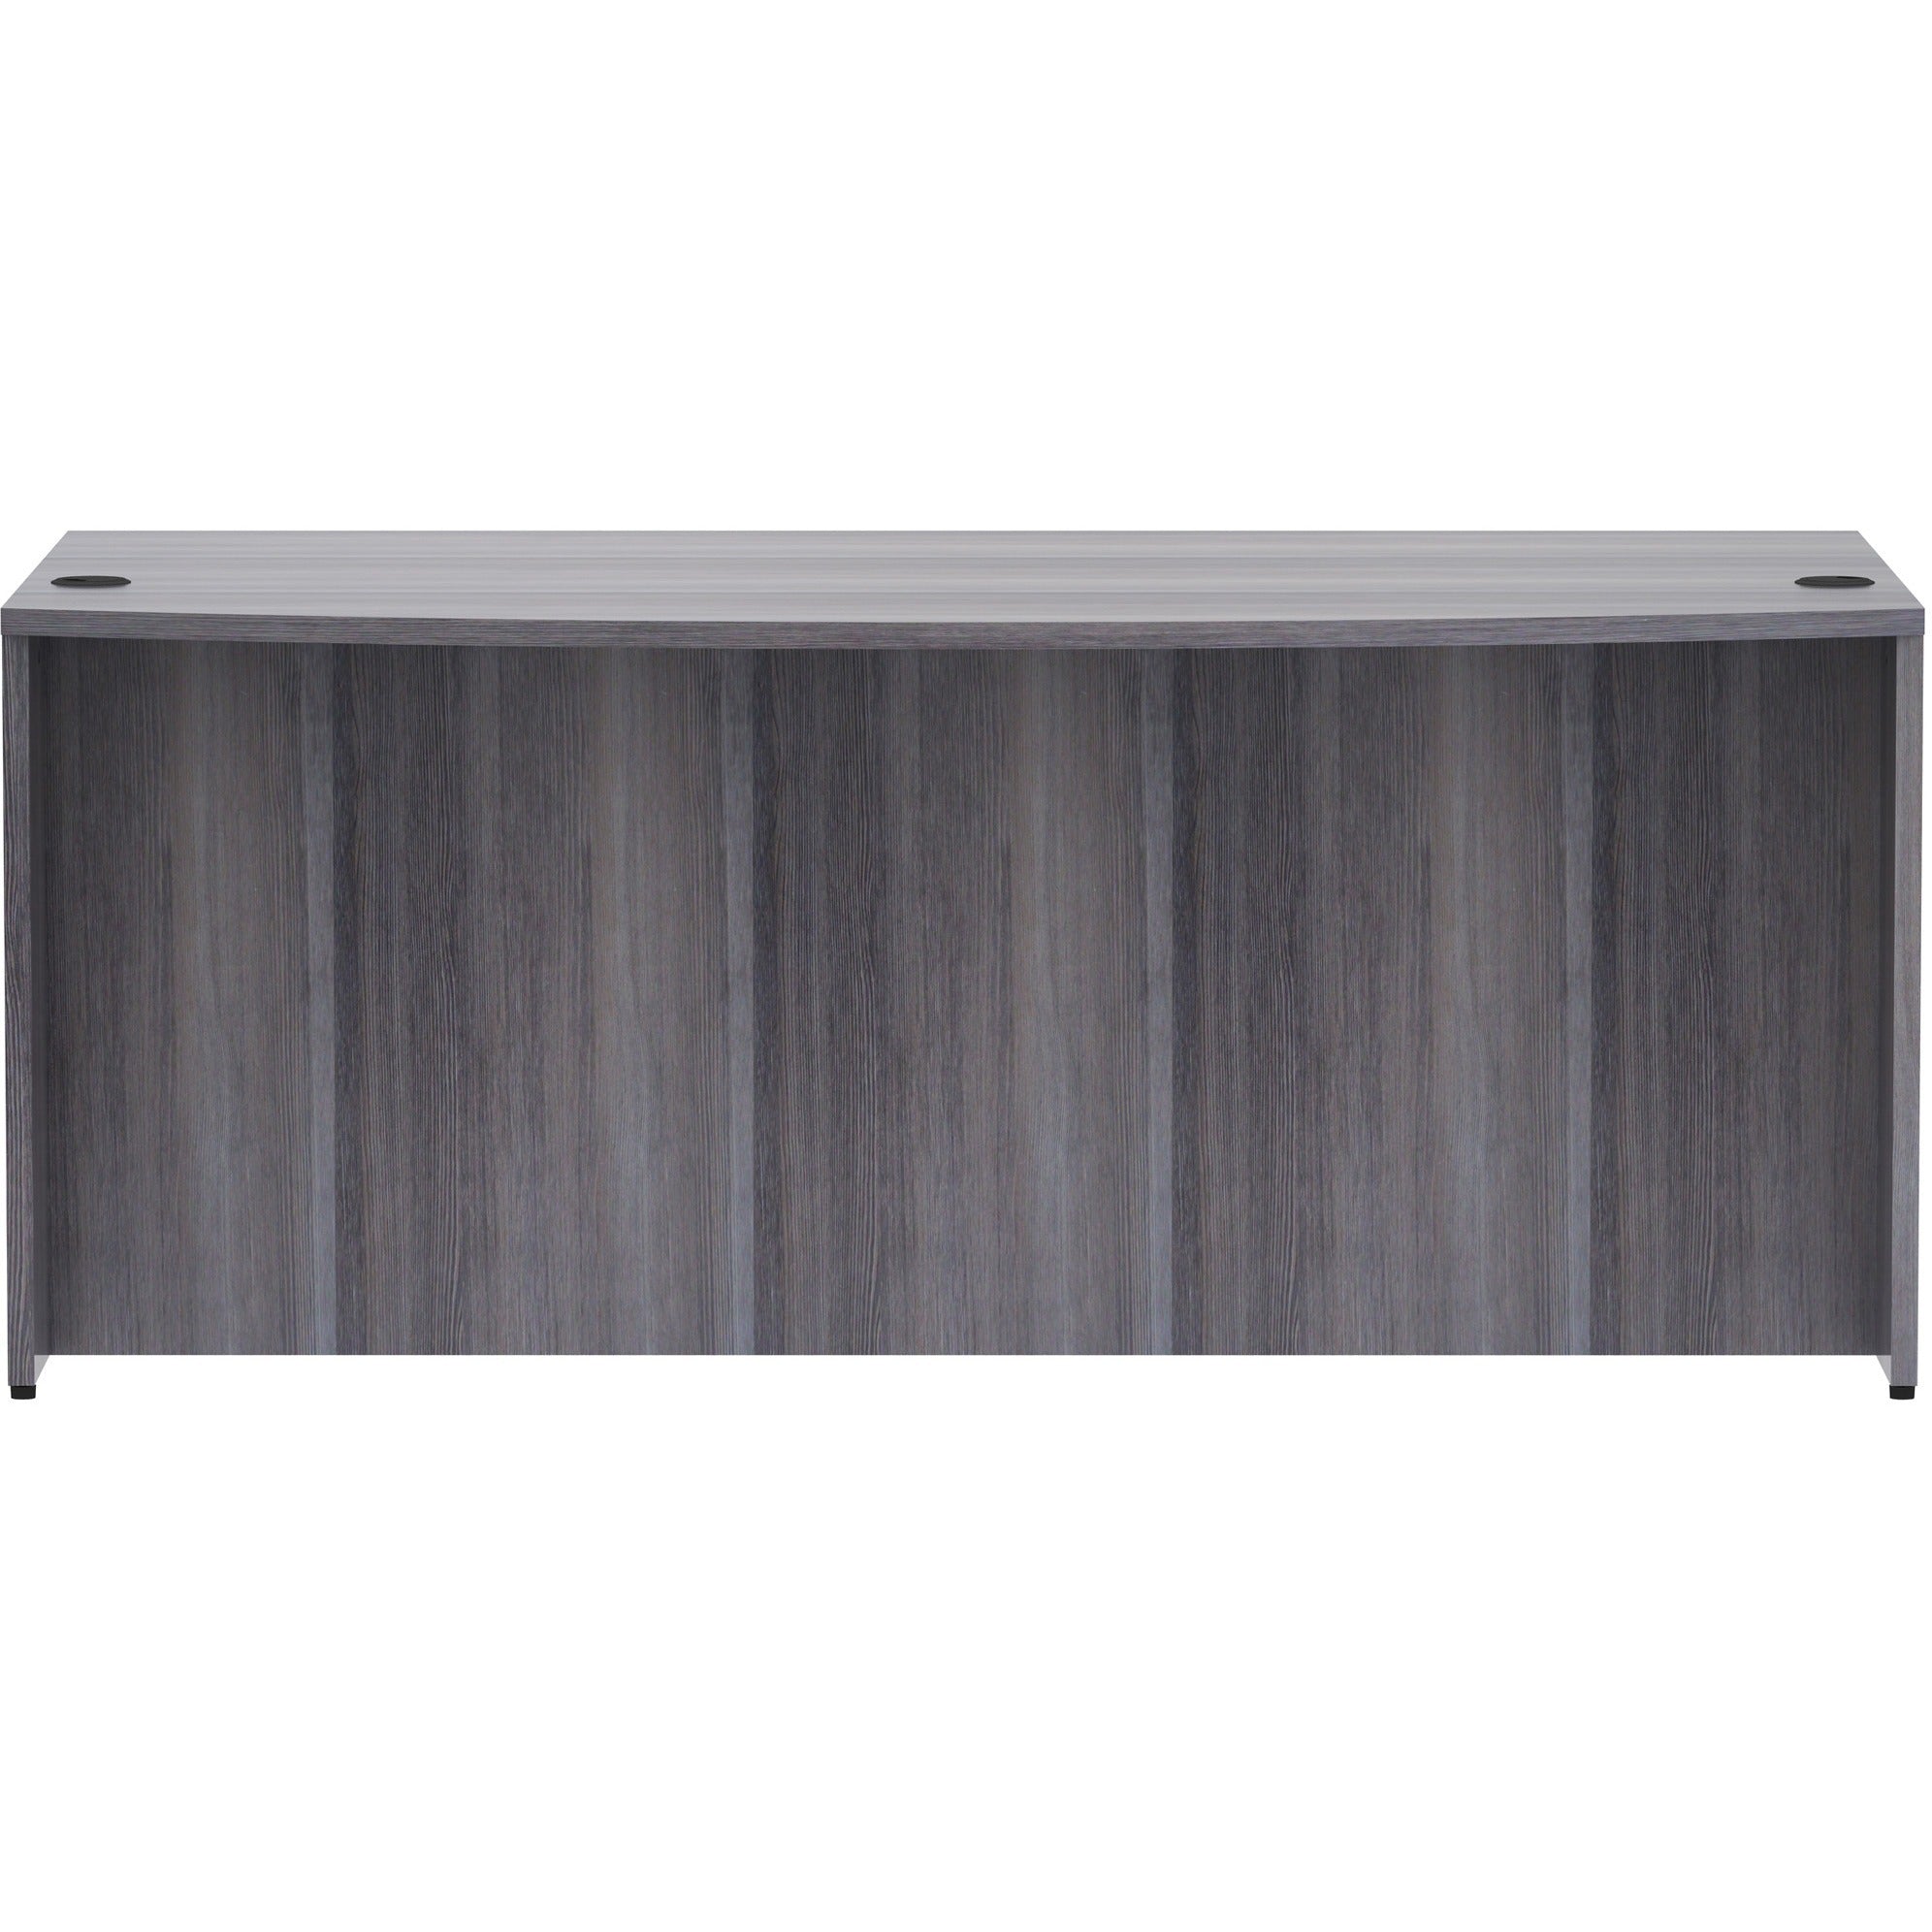 lorell-essentials-series-bowfront-desk-shell-72-x-414295-desk-shell-1-top-bow-front-edge-finish-weathered-charcoal-laminate_llr69591 - 3